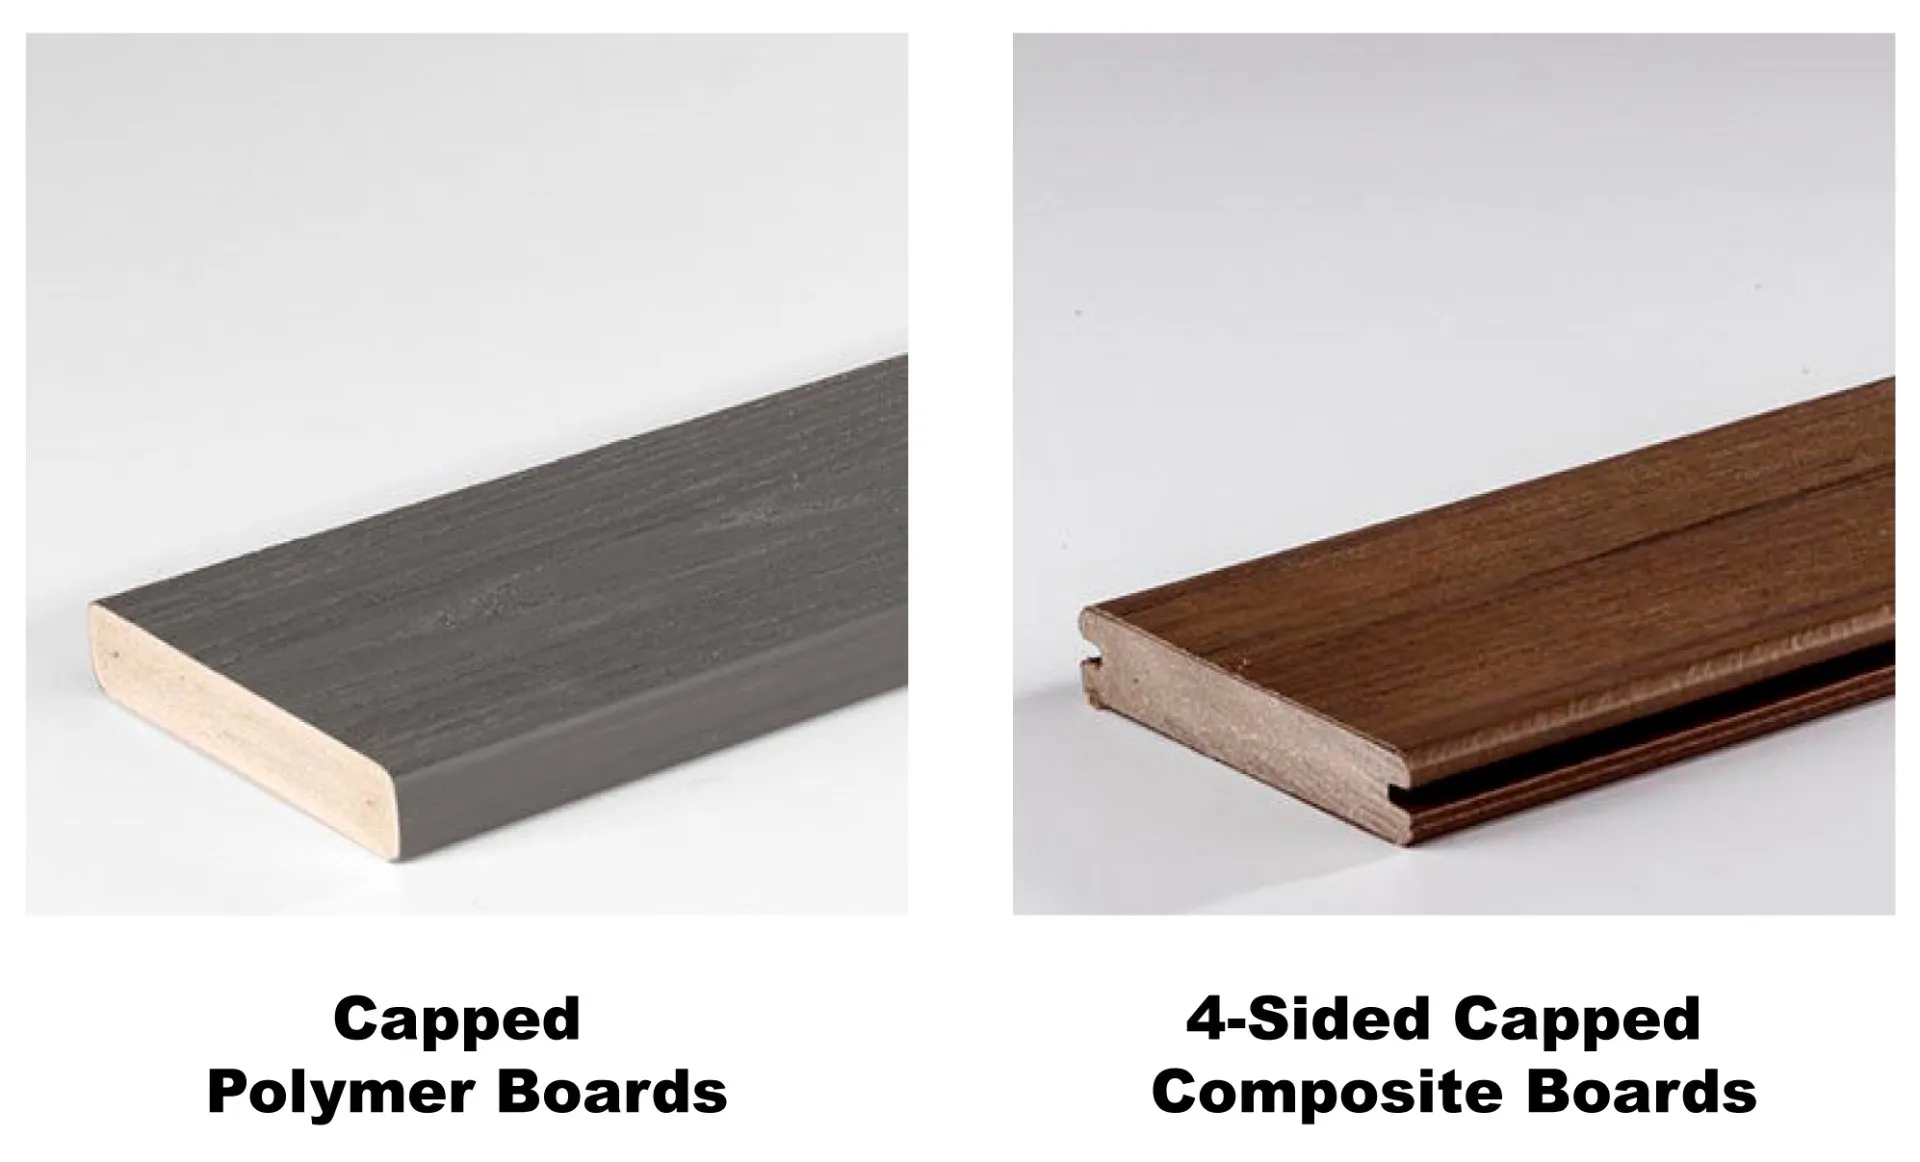 Capped Polymer Boards and 4-sidded capped composite Boards